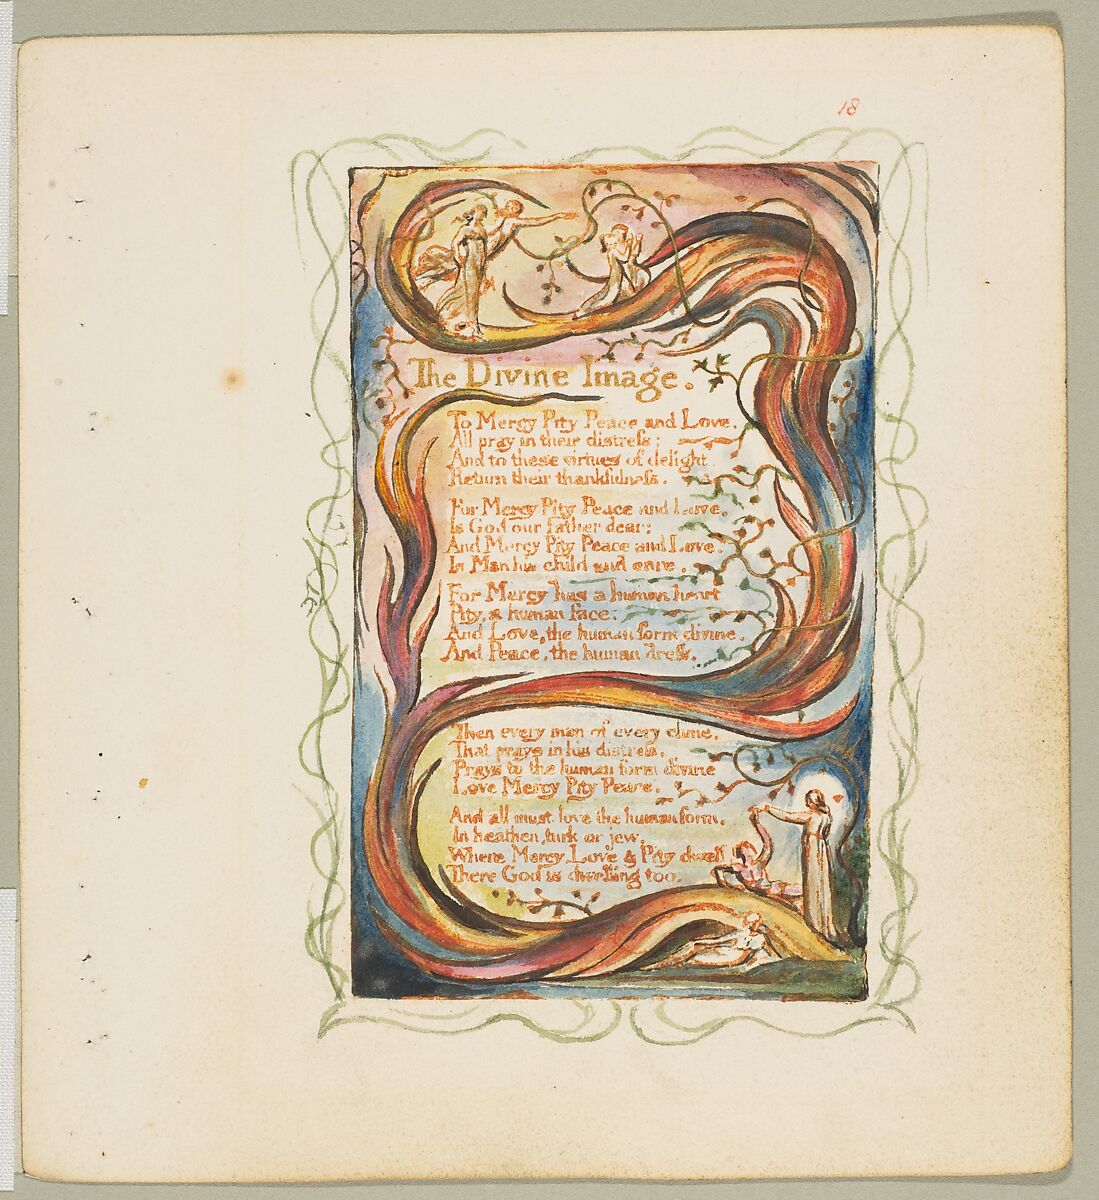 Songs of Innocence: The Divine Image, William Blake  British, Relief etching printed in orange-brown ink and hand-colored with watercolor and shell gold